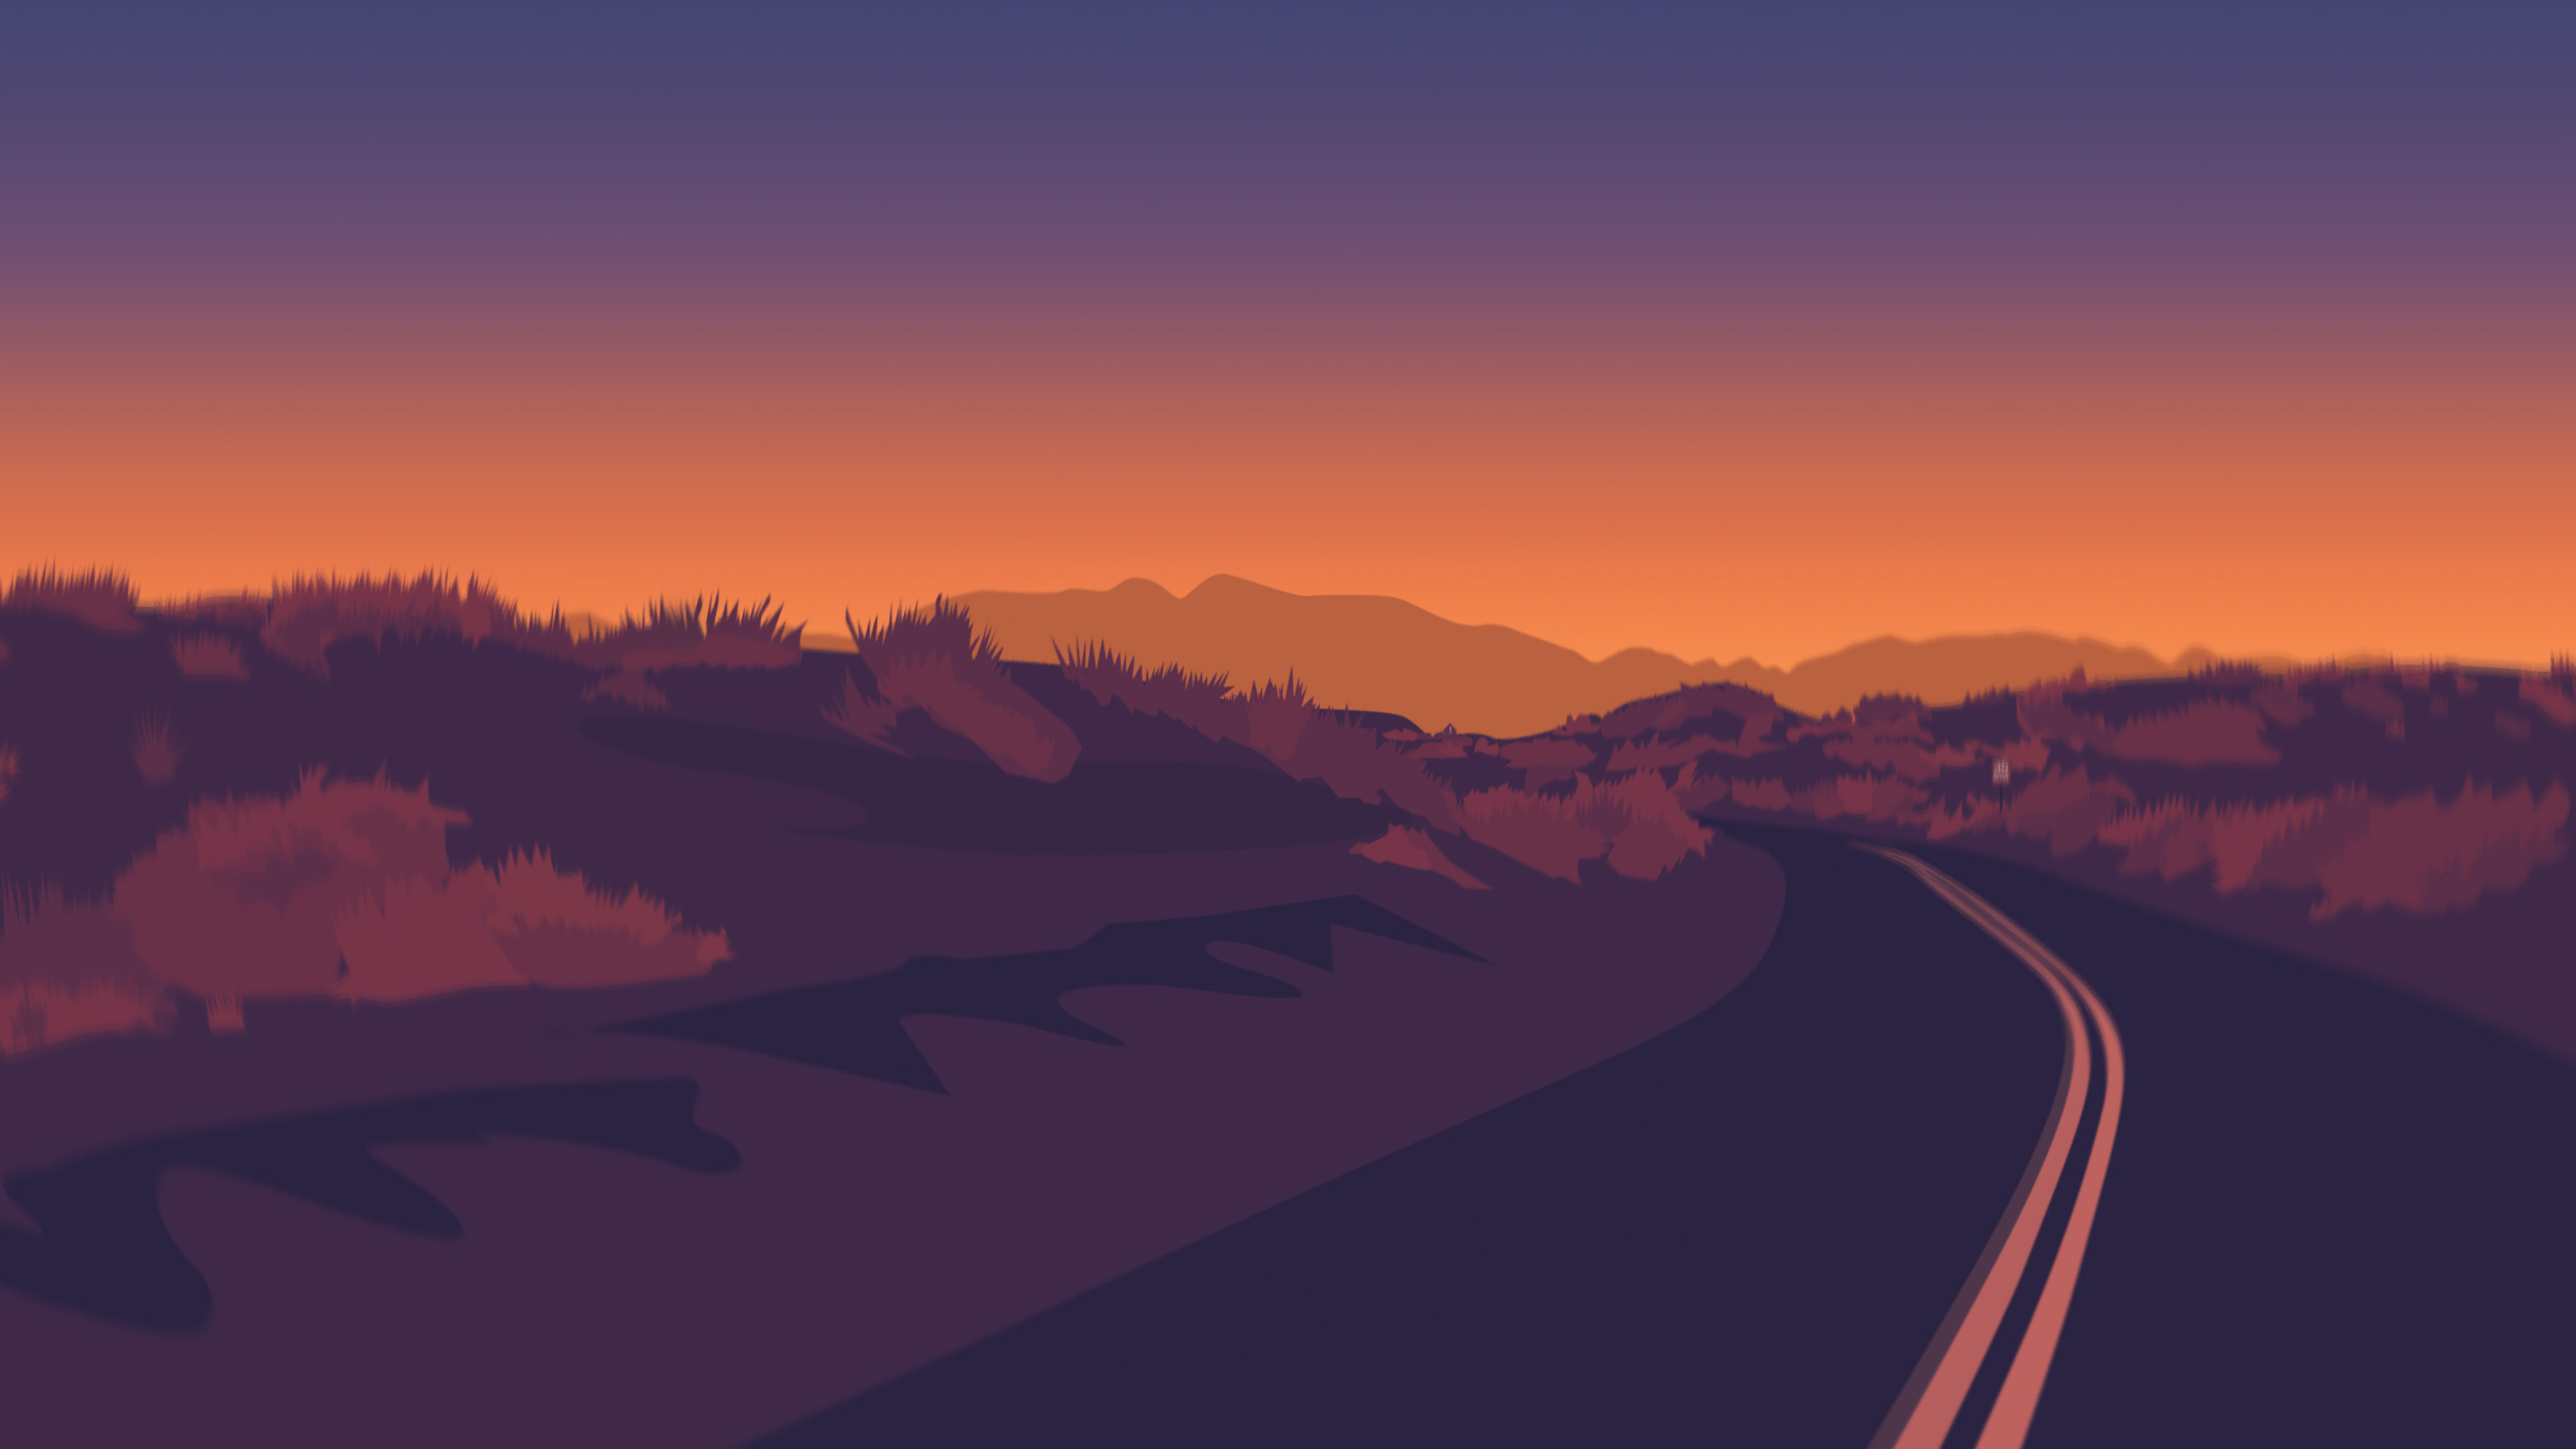 3840x2160 Firewatch Road 4k HD 4k Wallpapers, Images ...